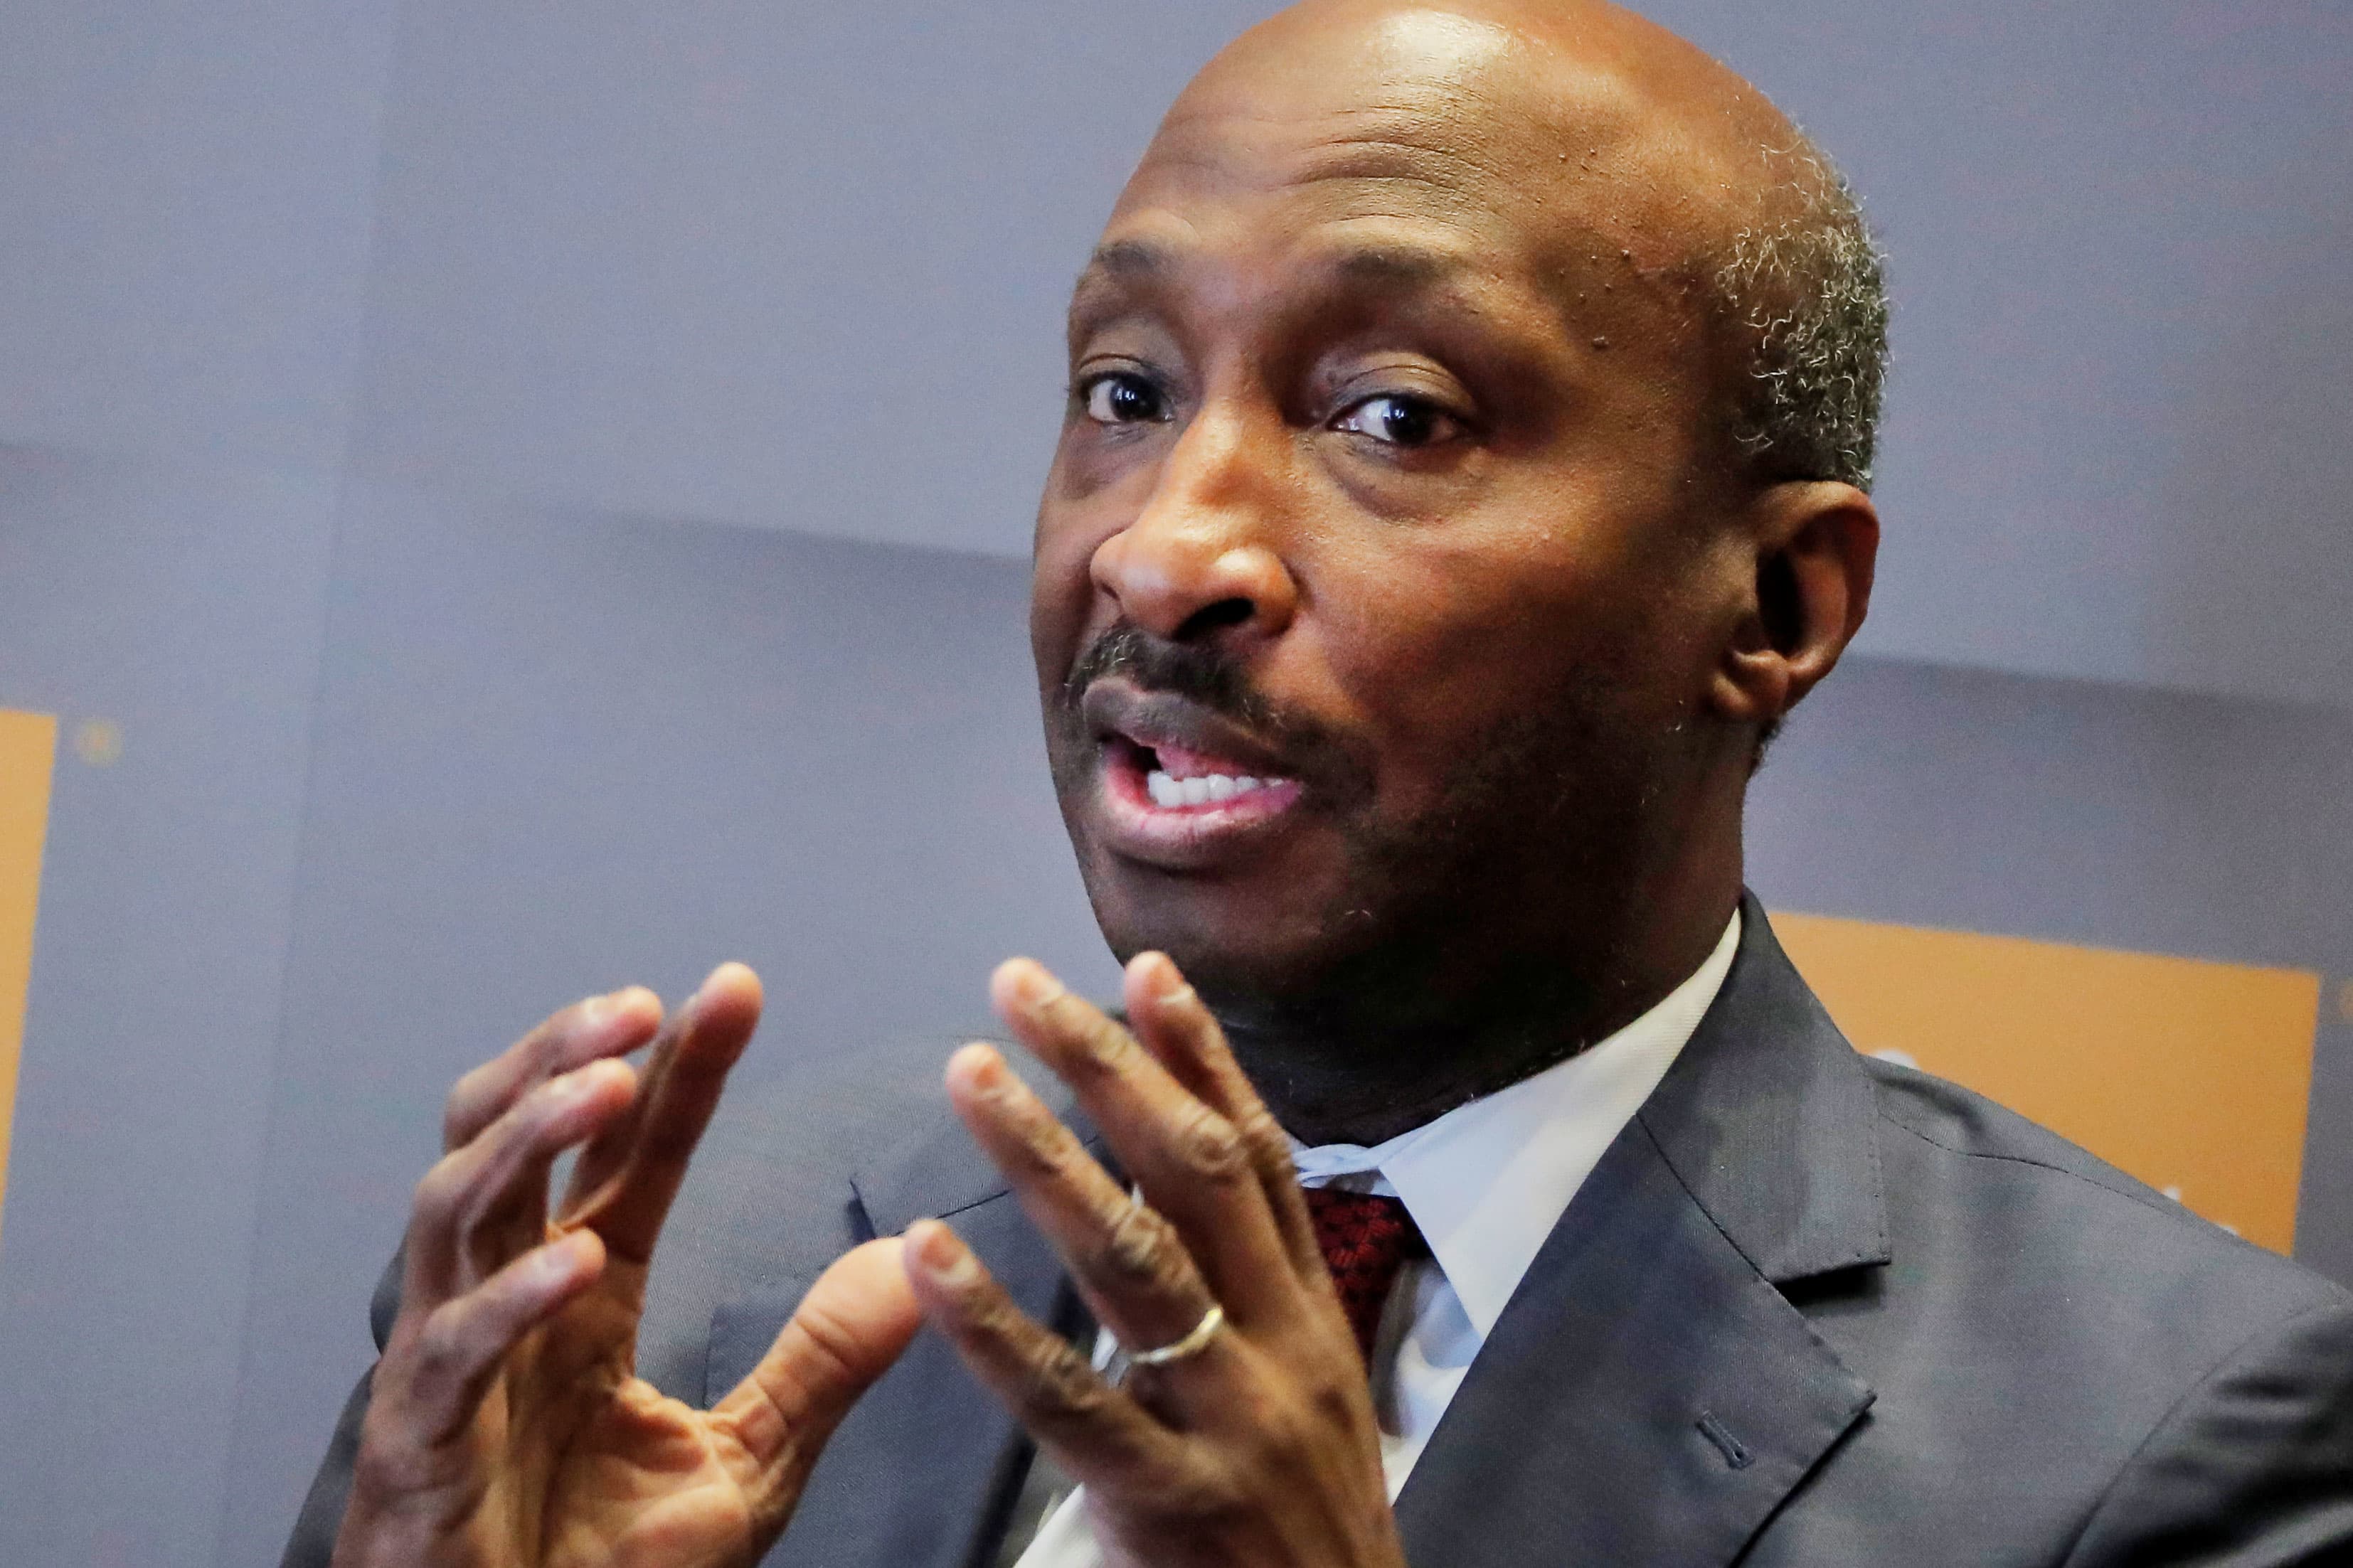 Merck says Kenneth Frazier should retire as CEO from June 30